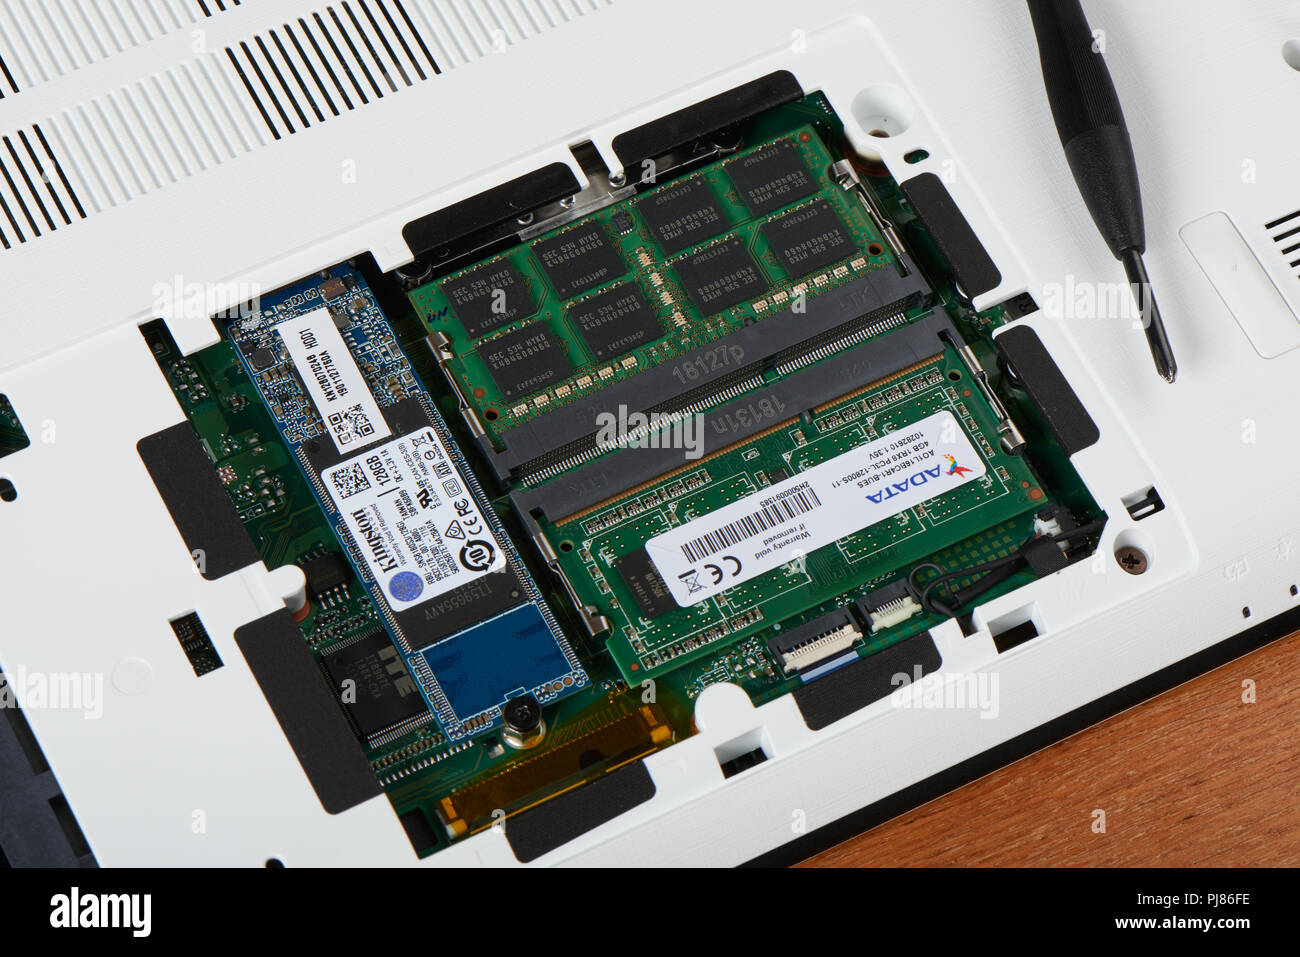 Gimpo-si, Korea - July 10, 2018: Access panel with DDR3L RAM and M.2 sata SSD on the bottom of a laptop, which has  RAM and SSD sata M.2 slot for hard Stock Photo